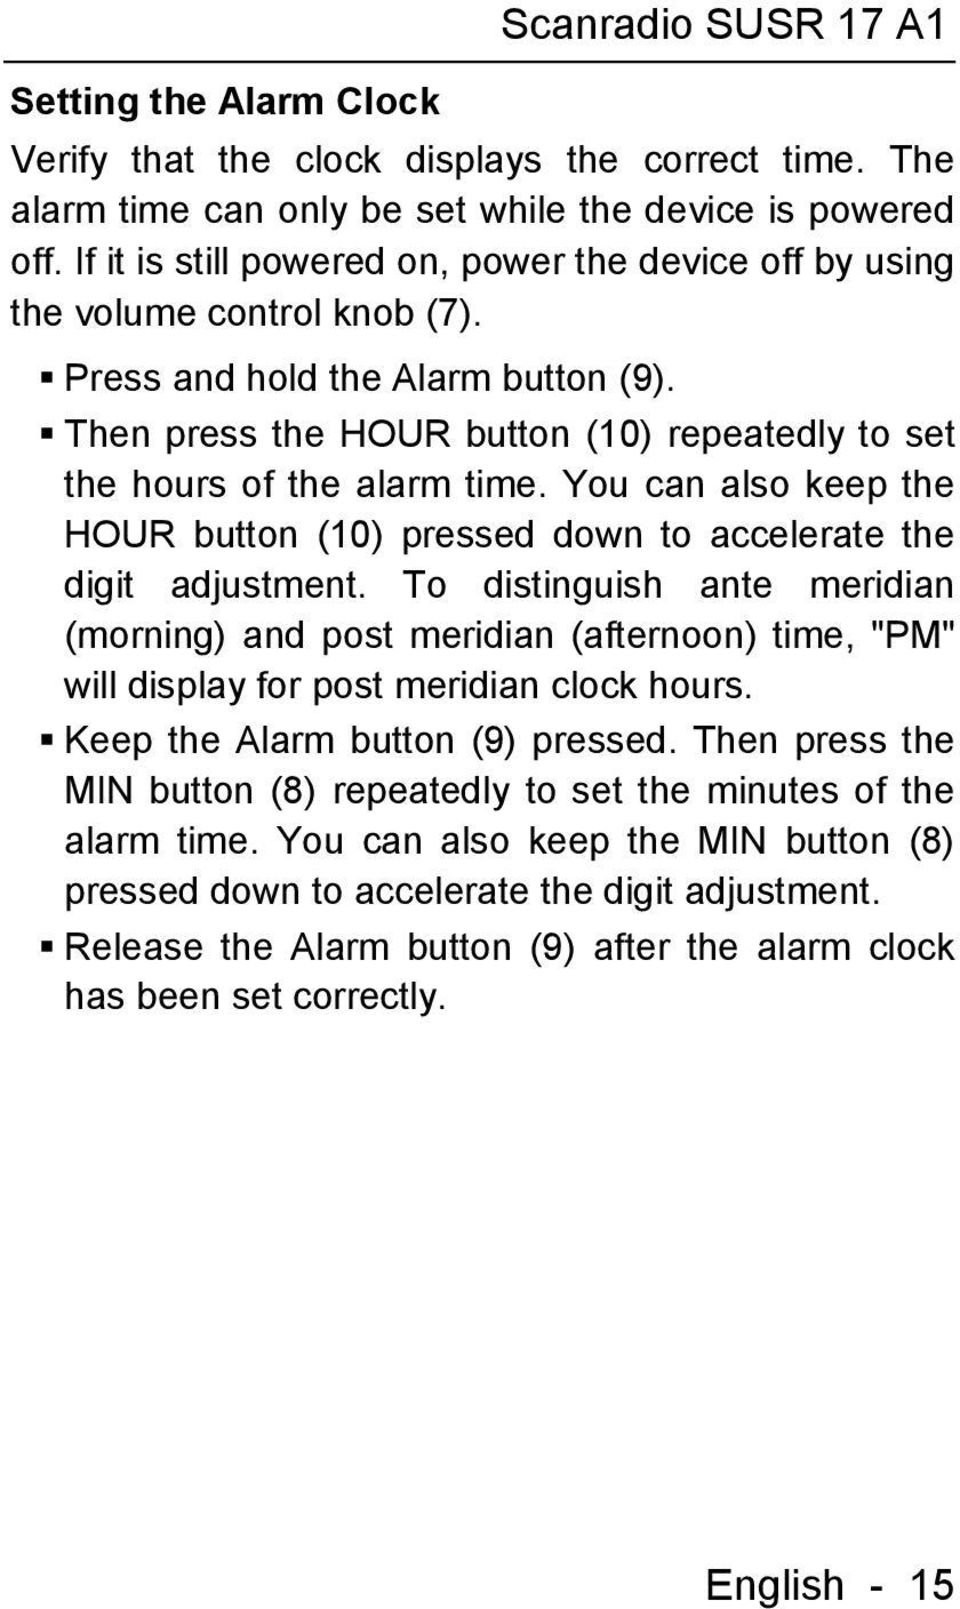 Then press the HOUR button (10) repeatedly to set the hours of the alarm time. You can also keep the HOUR button (10) pressed down to accelerate the digit adjustment.